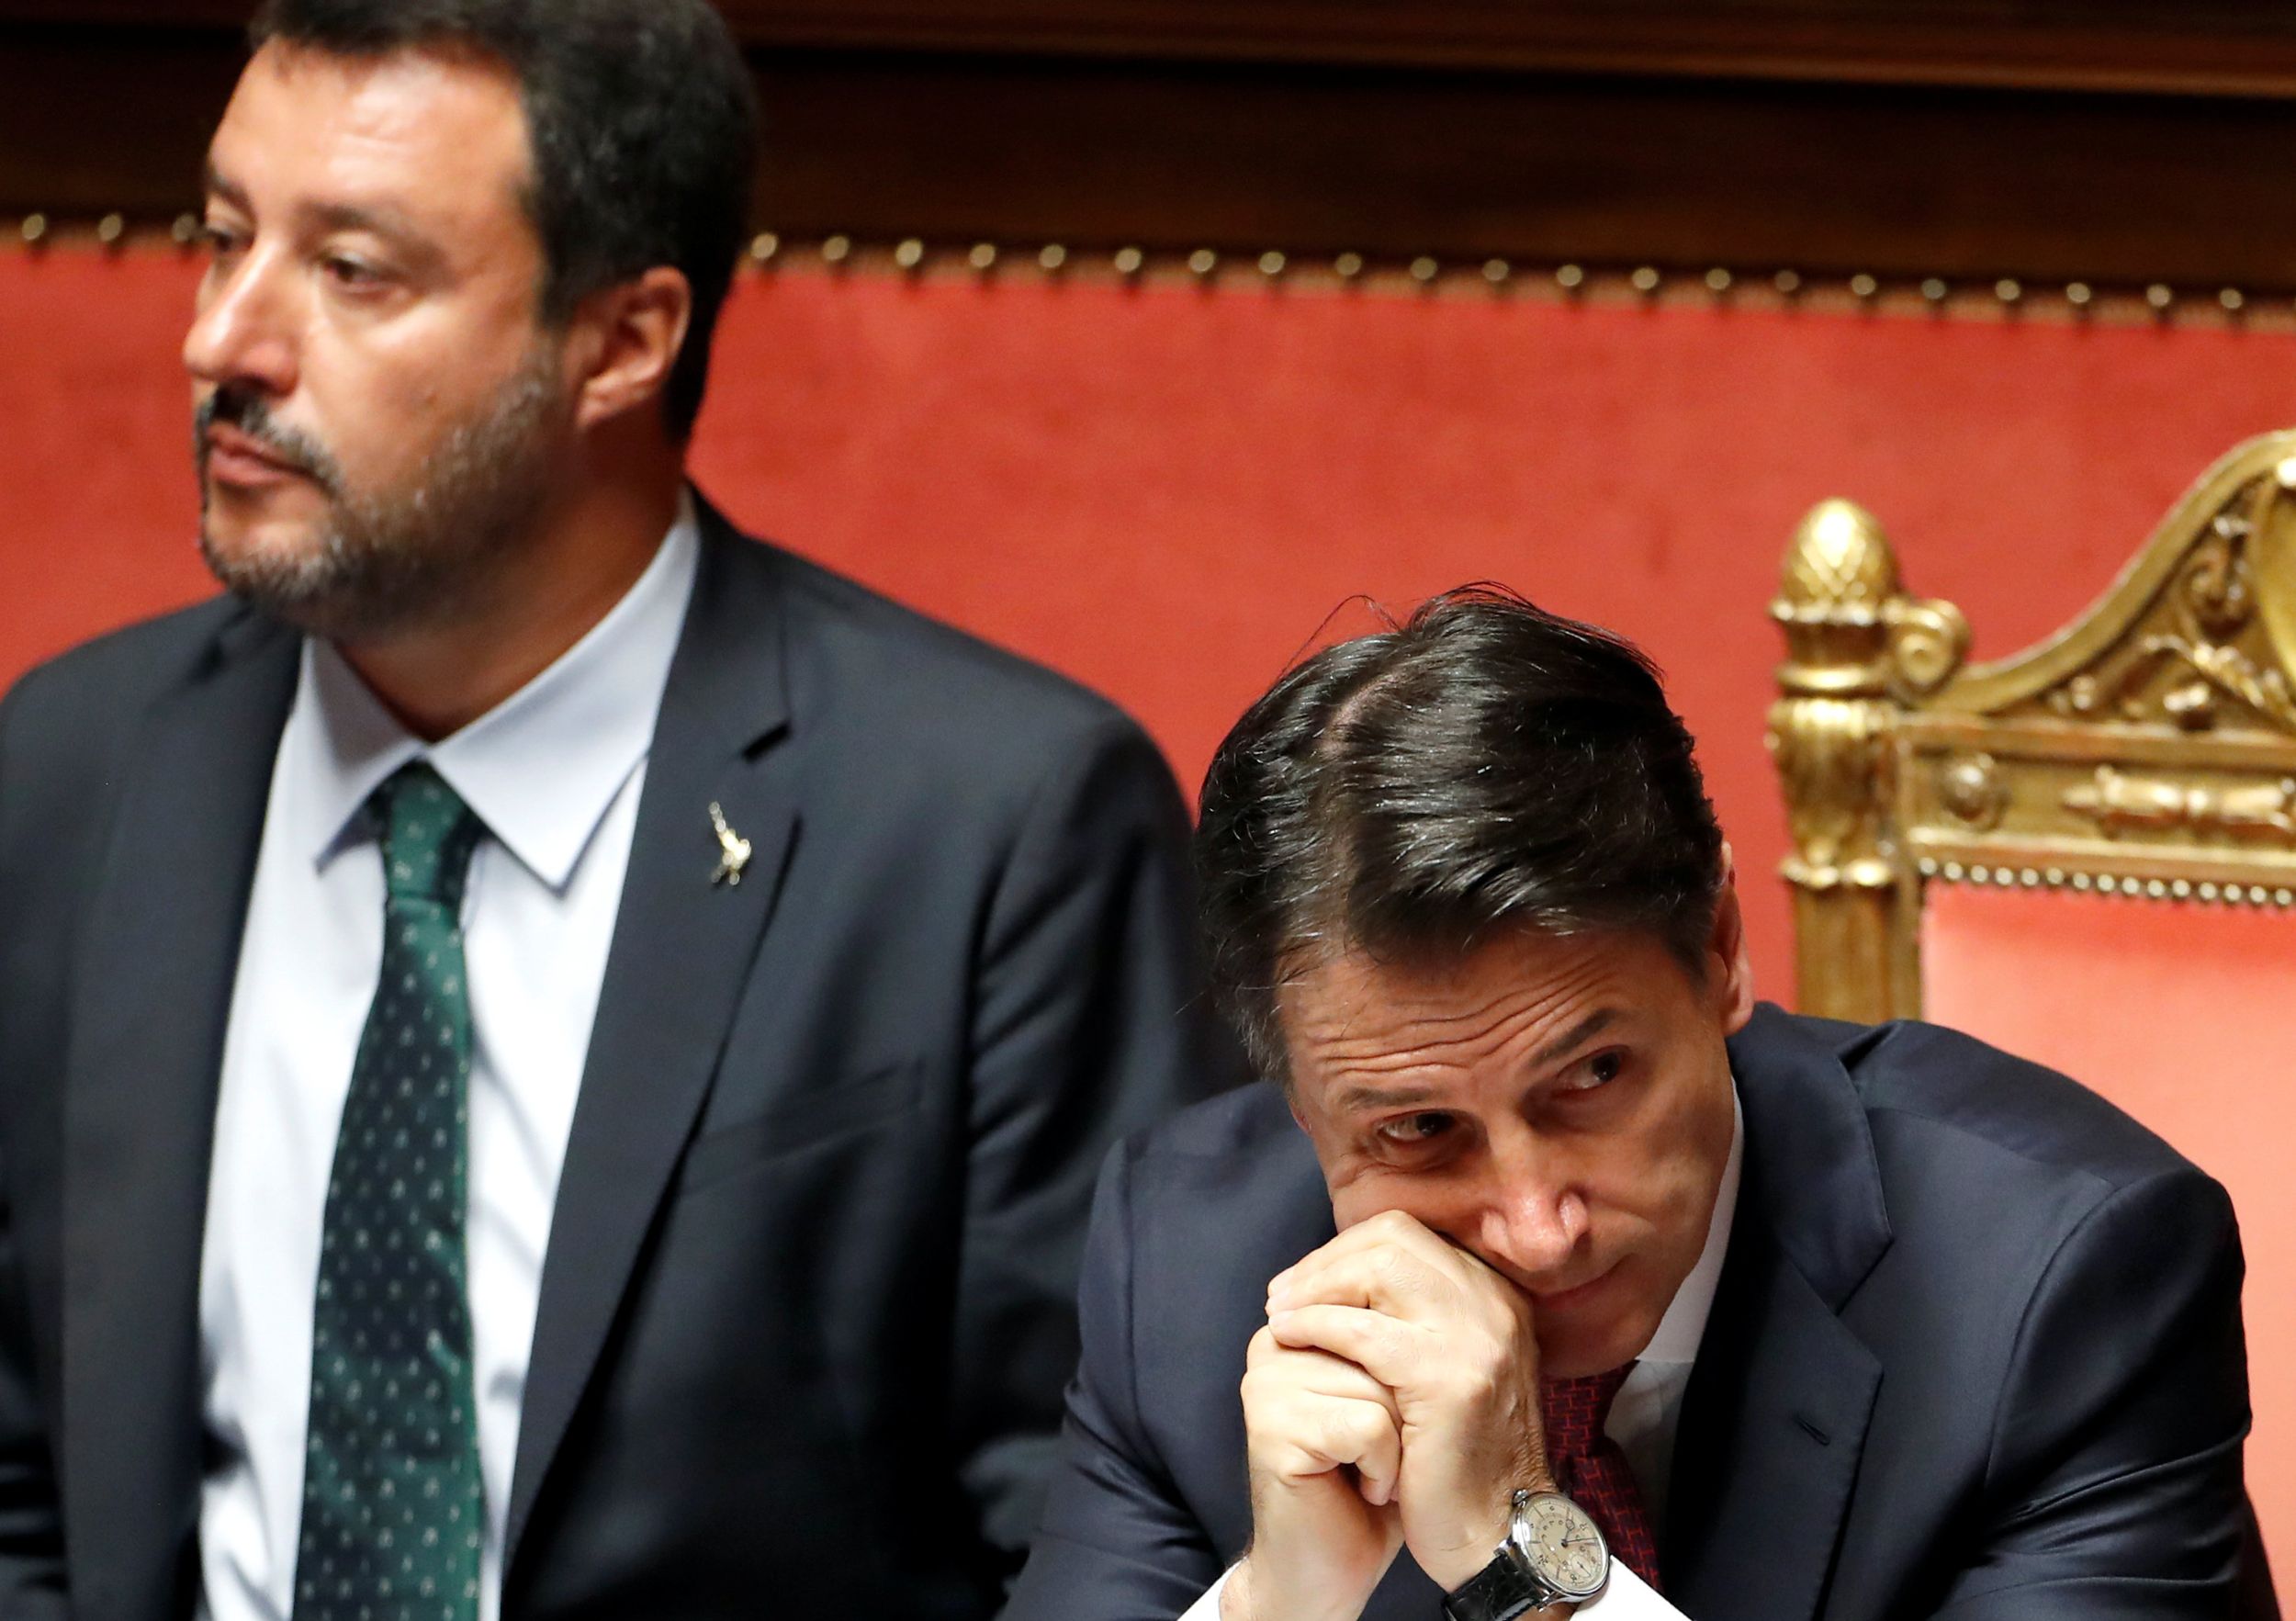 What We're Watching: Italy's uncertainty